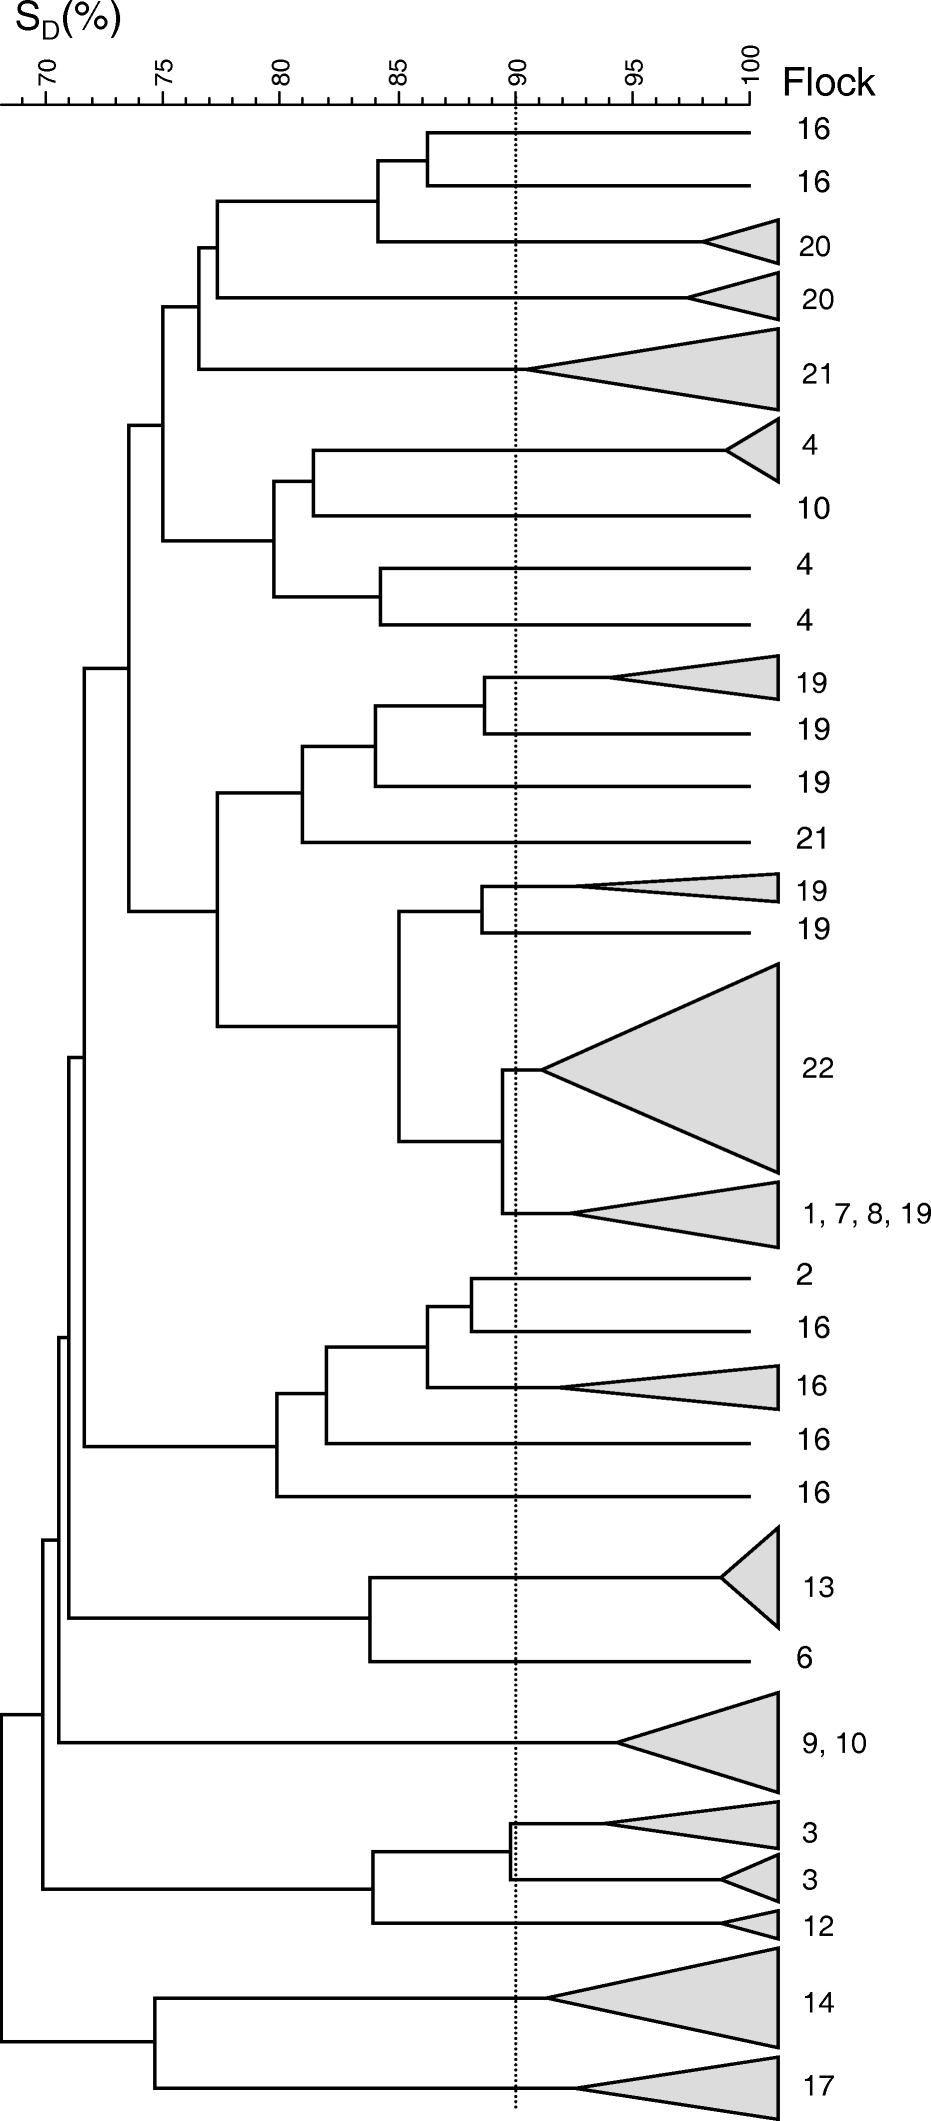 Figure 2.  Dendrogram (unweighted pair group method using arithmetic averages) of AFLP similarities of 83 Gallibacterium isolates. SD, band-based Dice similarity coefficient (%). Flocks, the flock number from which the isolates originate. Isolates grouping at a 90% similarity level or higher were pooled as indicated by grey triangles. Dotted line, clonal cut-off level at 90% similarity.